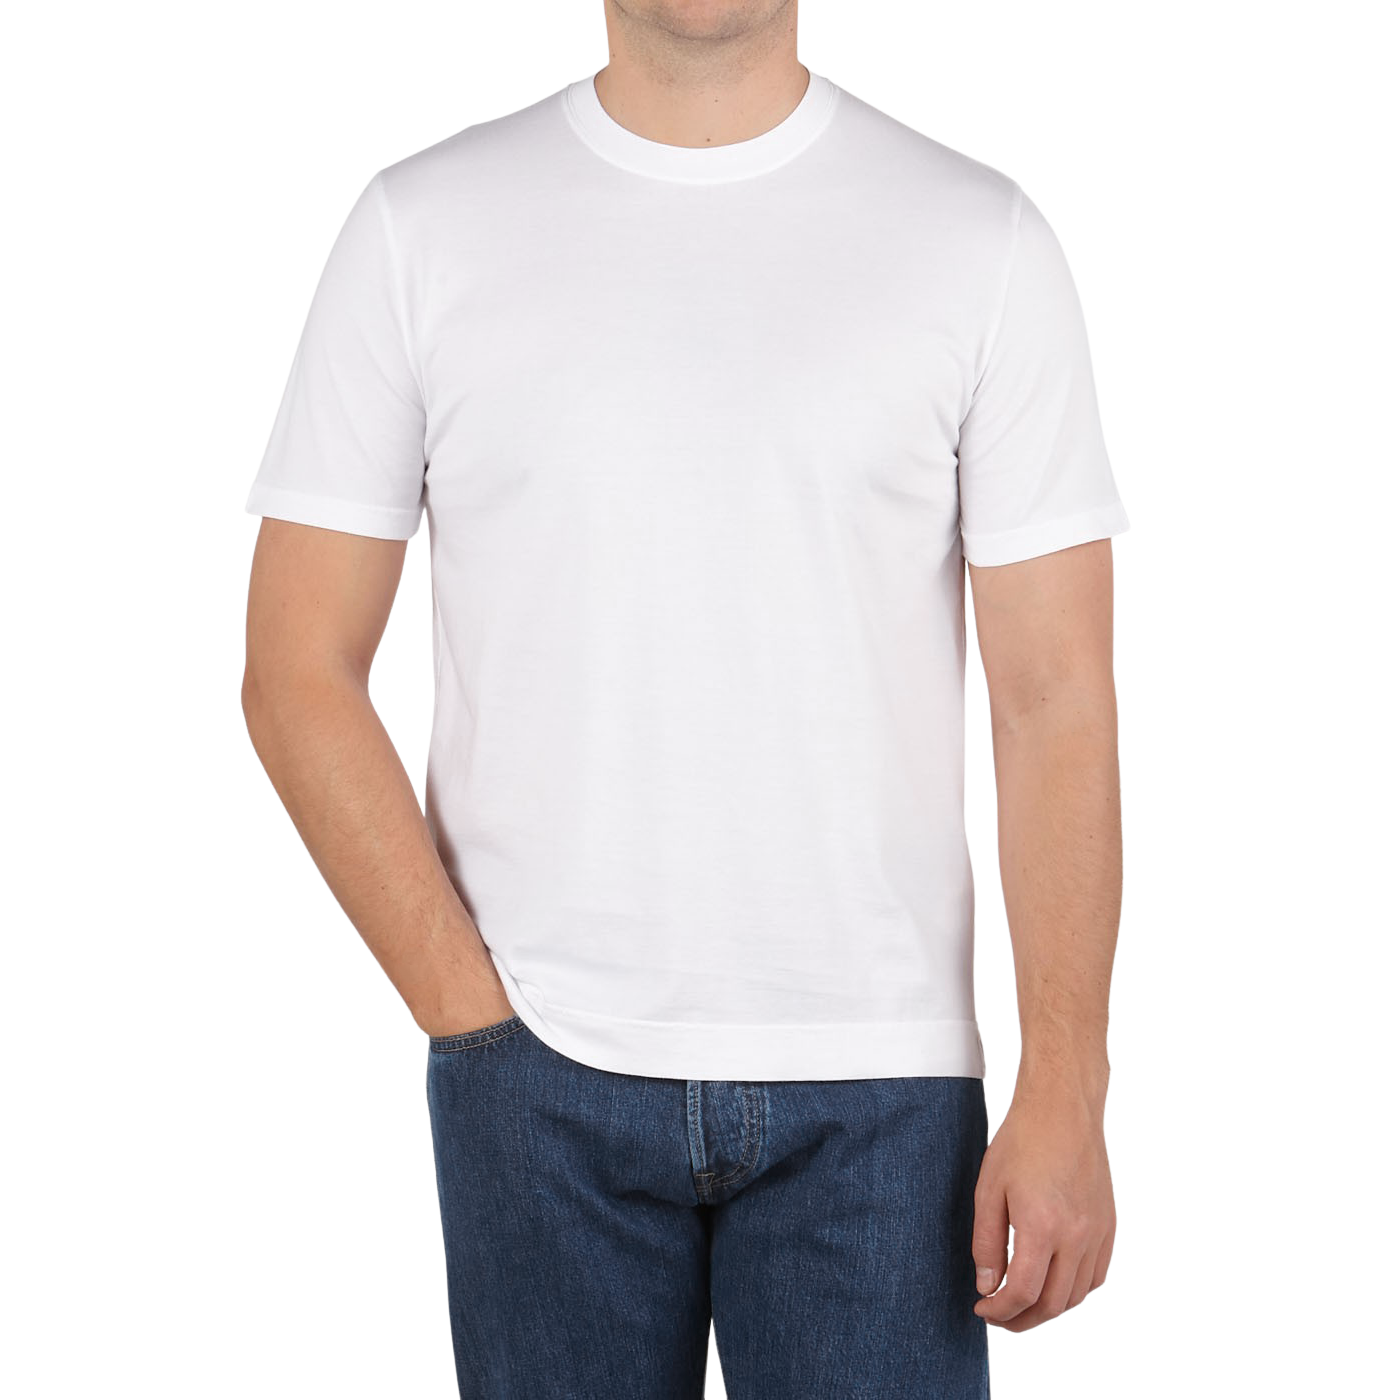 Fedeli Washed White Organic Cotton Jersey T-Shirt Front